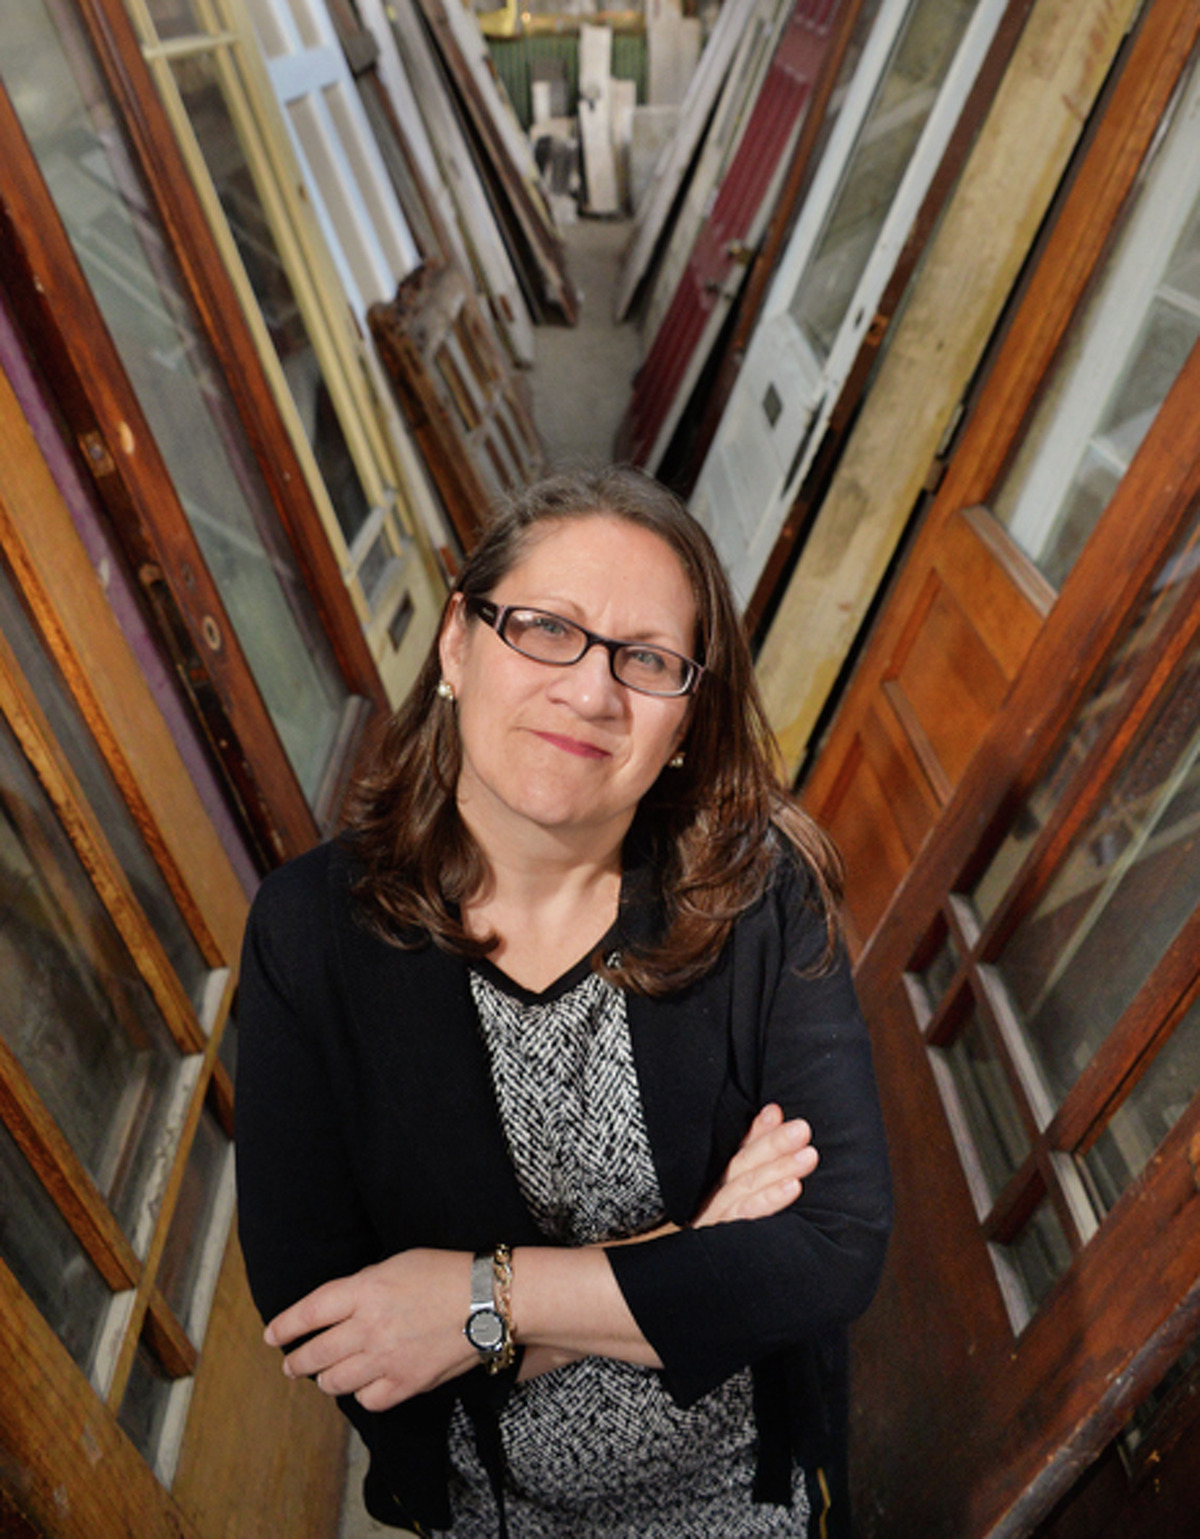 Executive director Susan Holland in an aisle of premium doors in Historic Albany Foundation's warehouse Tuesday Jan. 13, 2015, in Albany, NY.